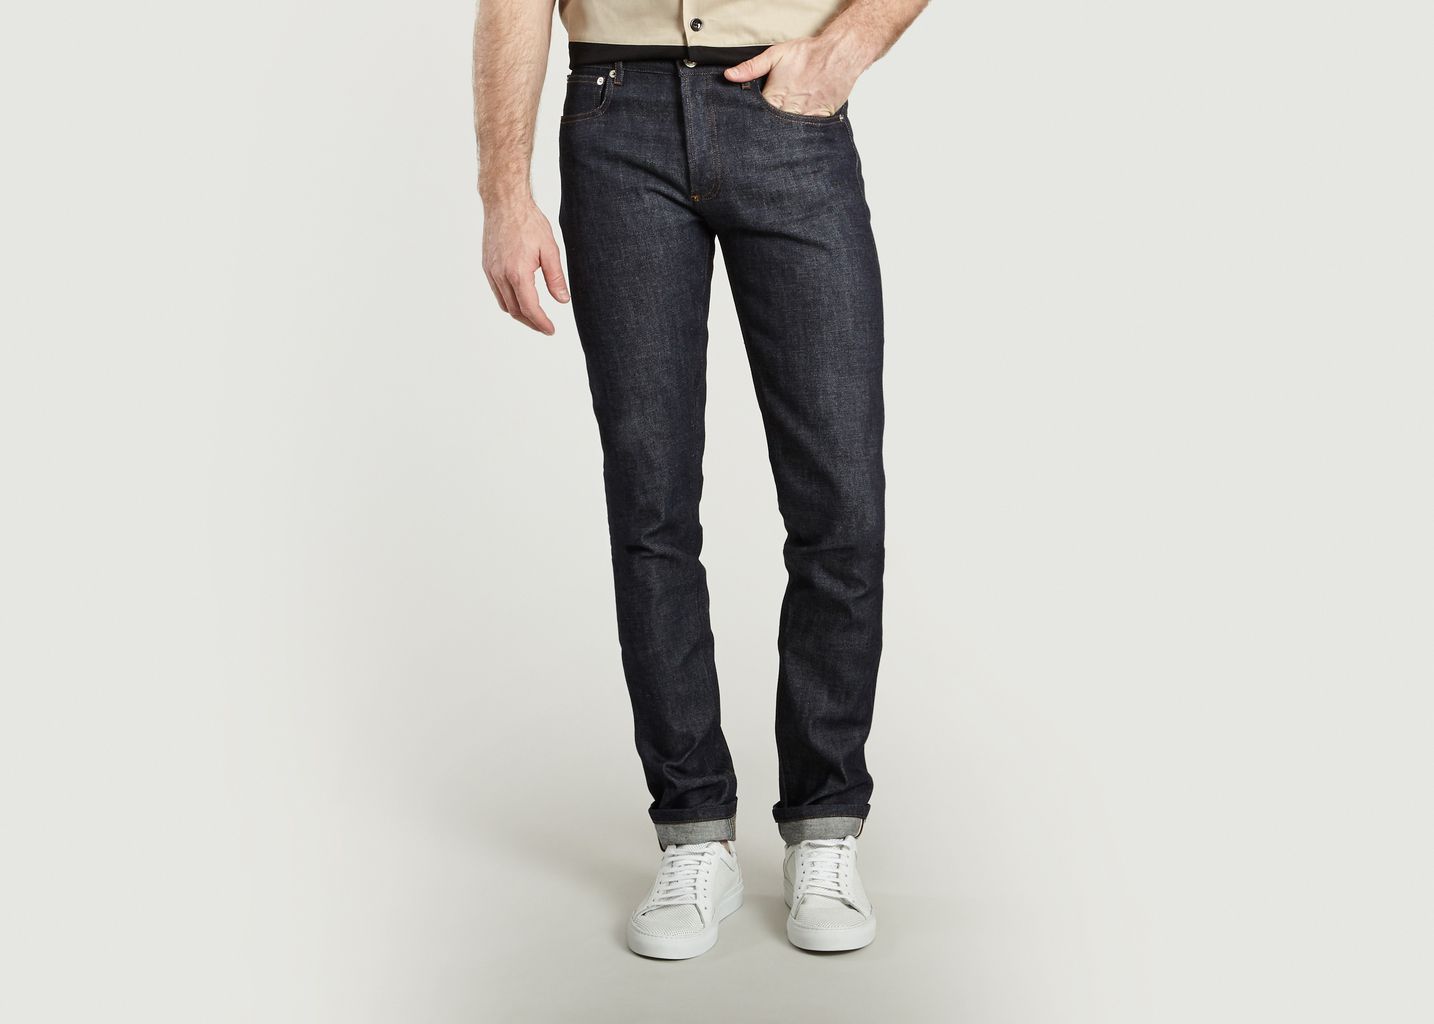 Small Standard Jeans - A.P.C.